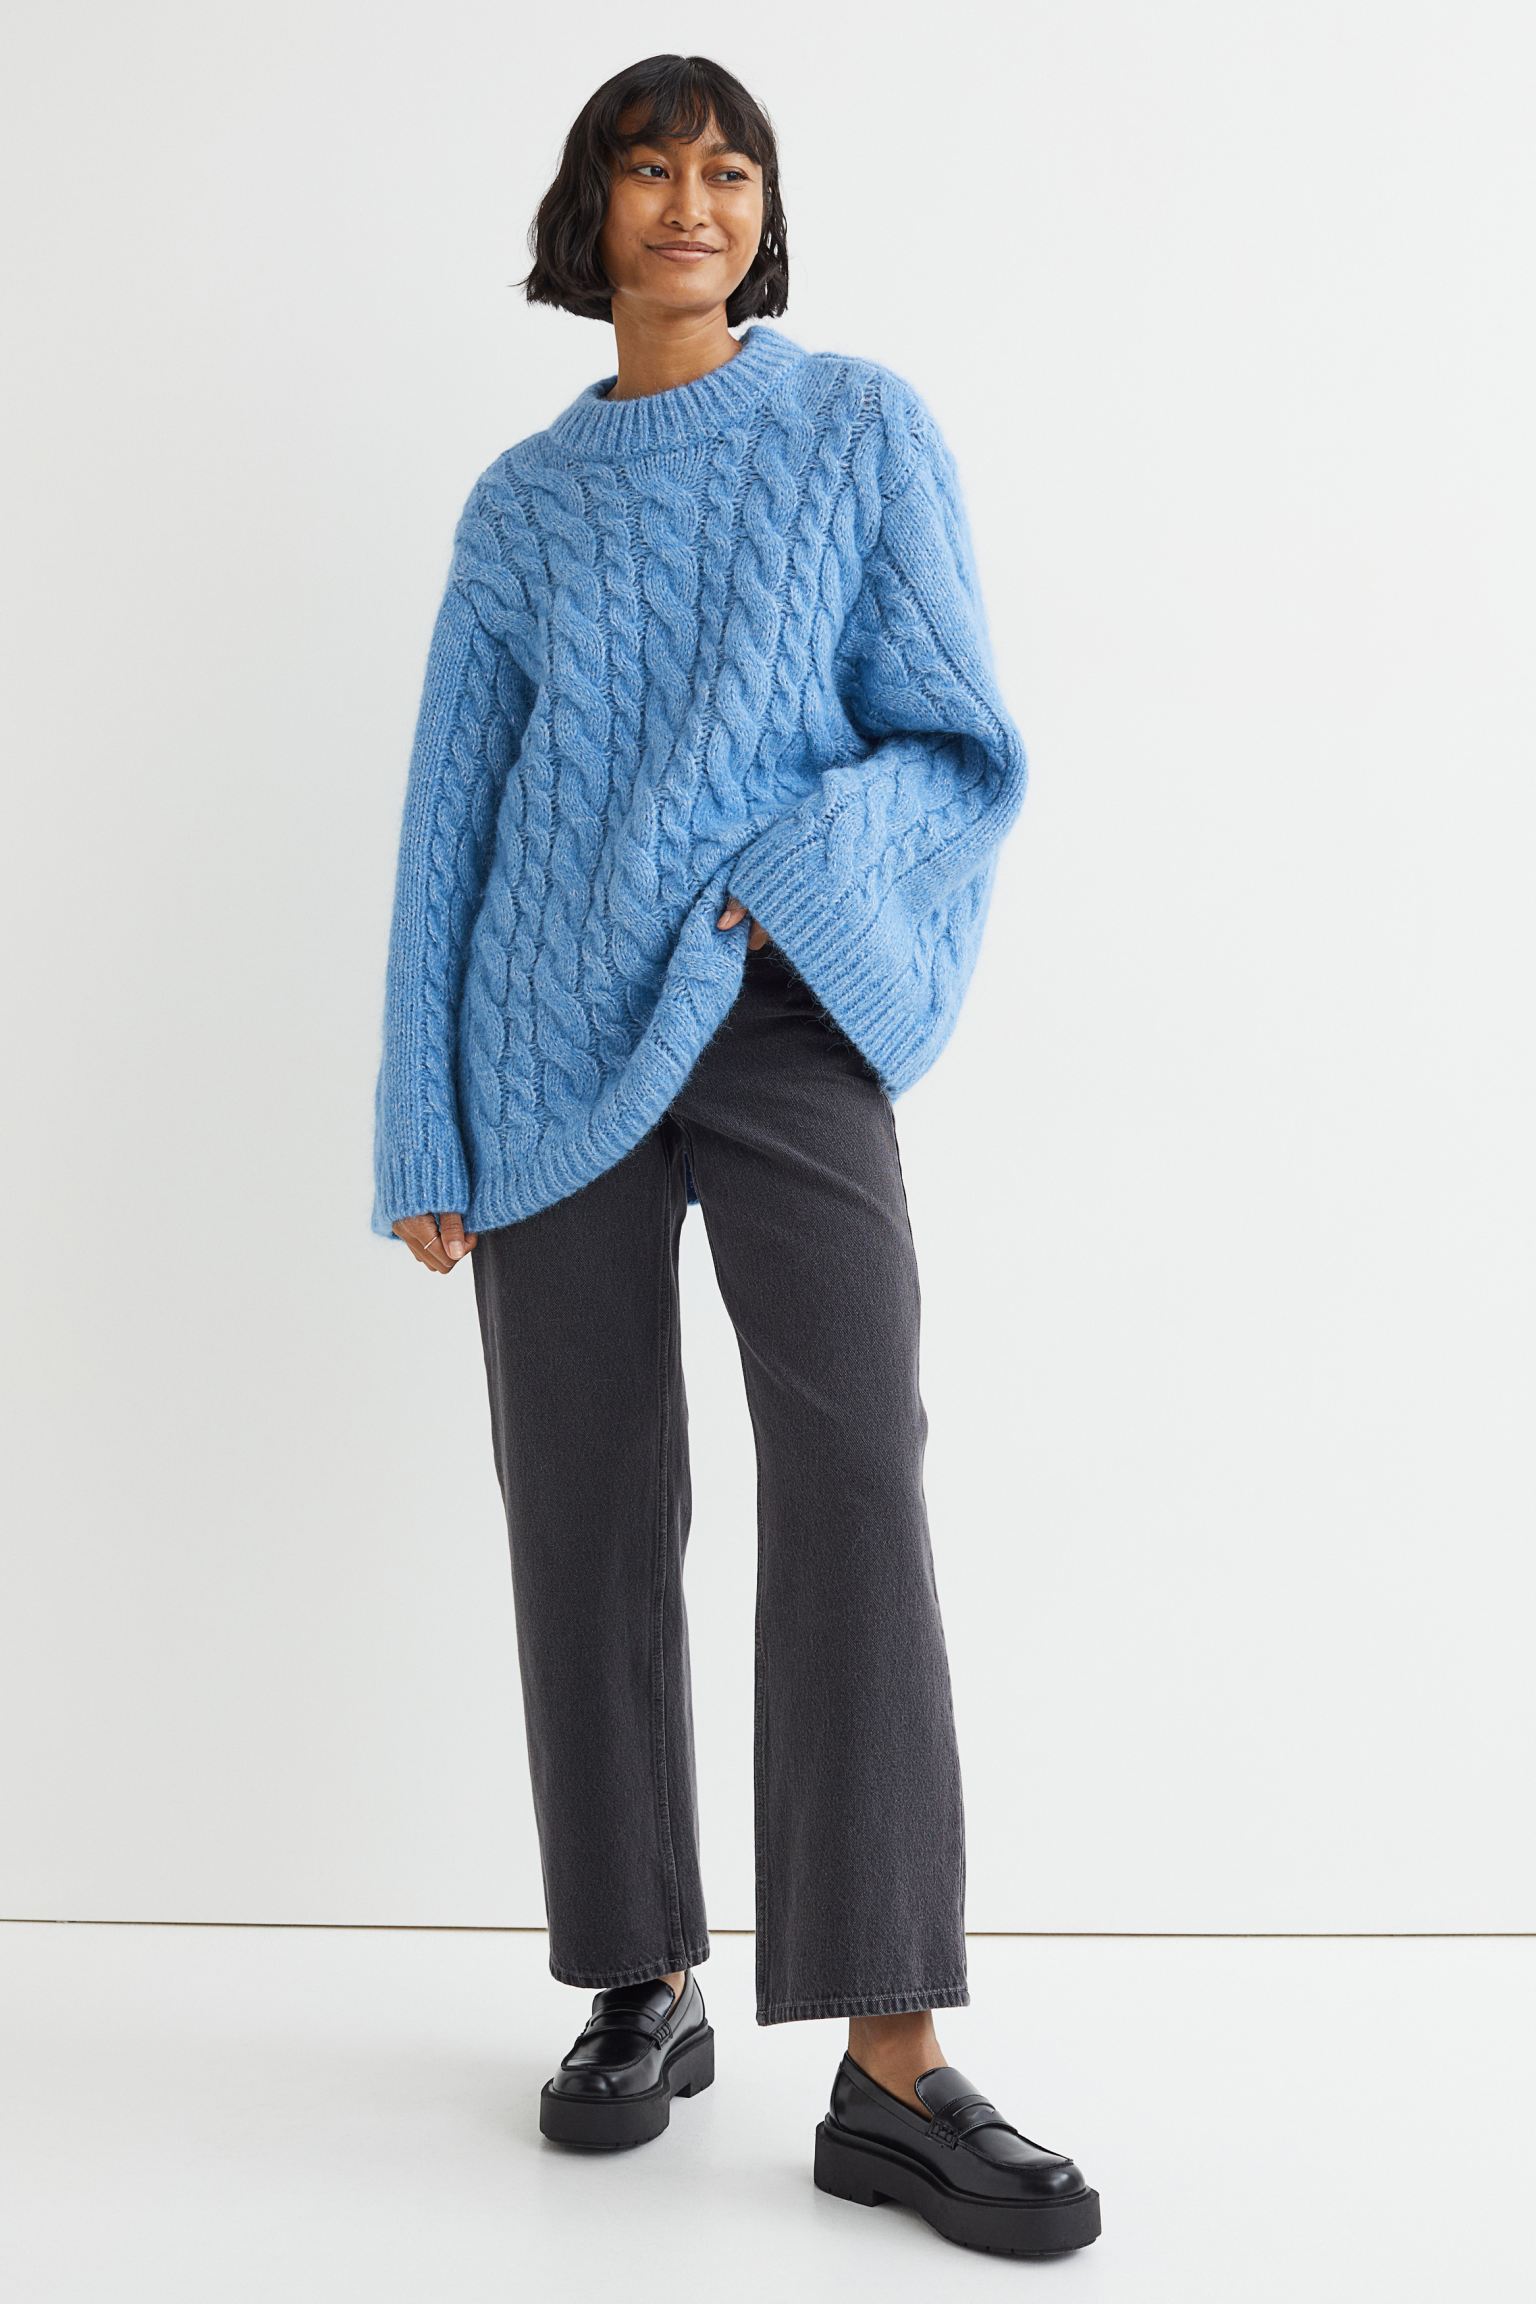 9 colourful knits to get you in the mood for Spring - VIP Magazine